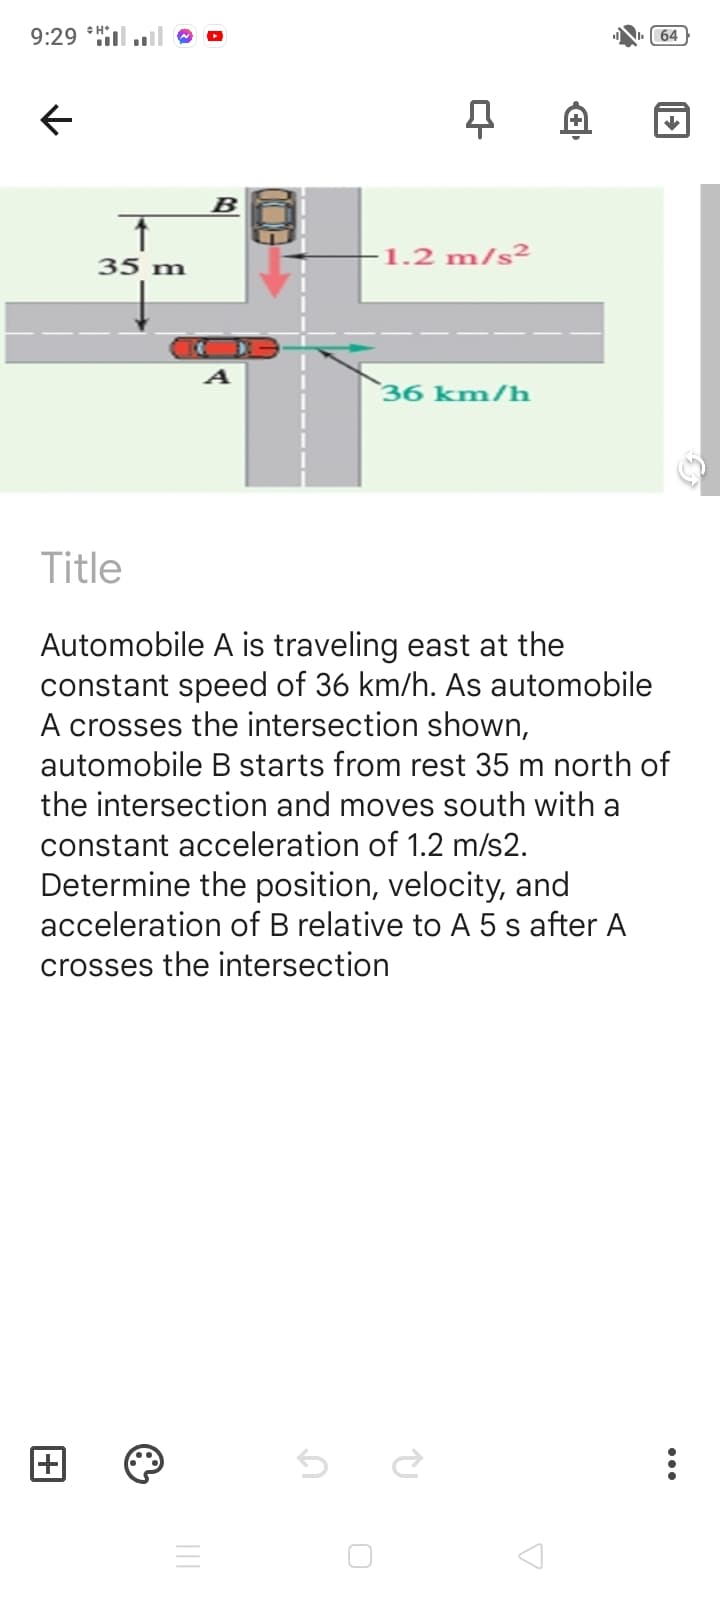 9:29 *Hil
64
B
35 m
1.2 m/s²
36 km/h
Title
Automobile A is traveling east at the
constant speed of 36 km/h. As automobile
A crosses the intersection shown,
automobile B starts from rest 35 m north of
the intersection and moves south with a
constant acceleration of 1.2 m/s2.
Determine the position, velocity, and
acceleration of B relative to A 5 s after A
crosses the intersection
+
